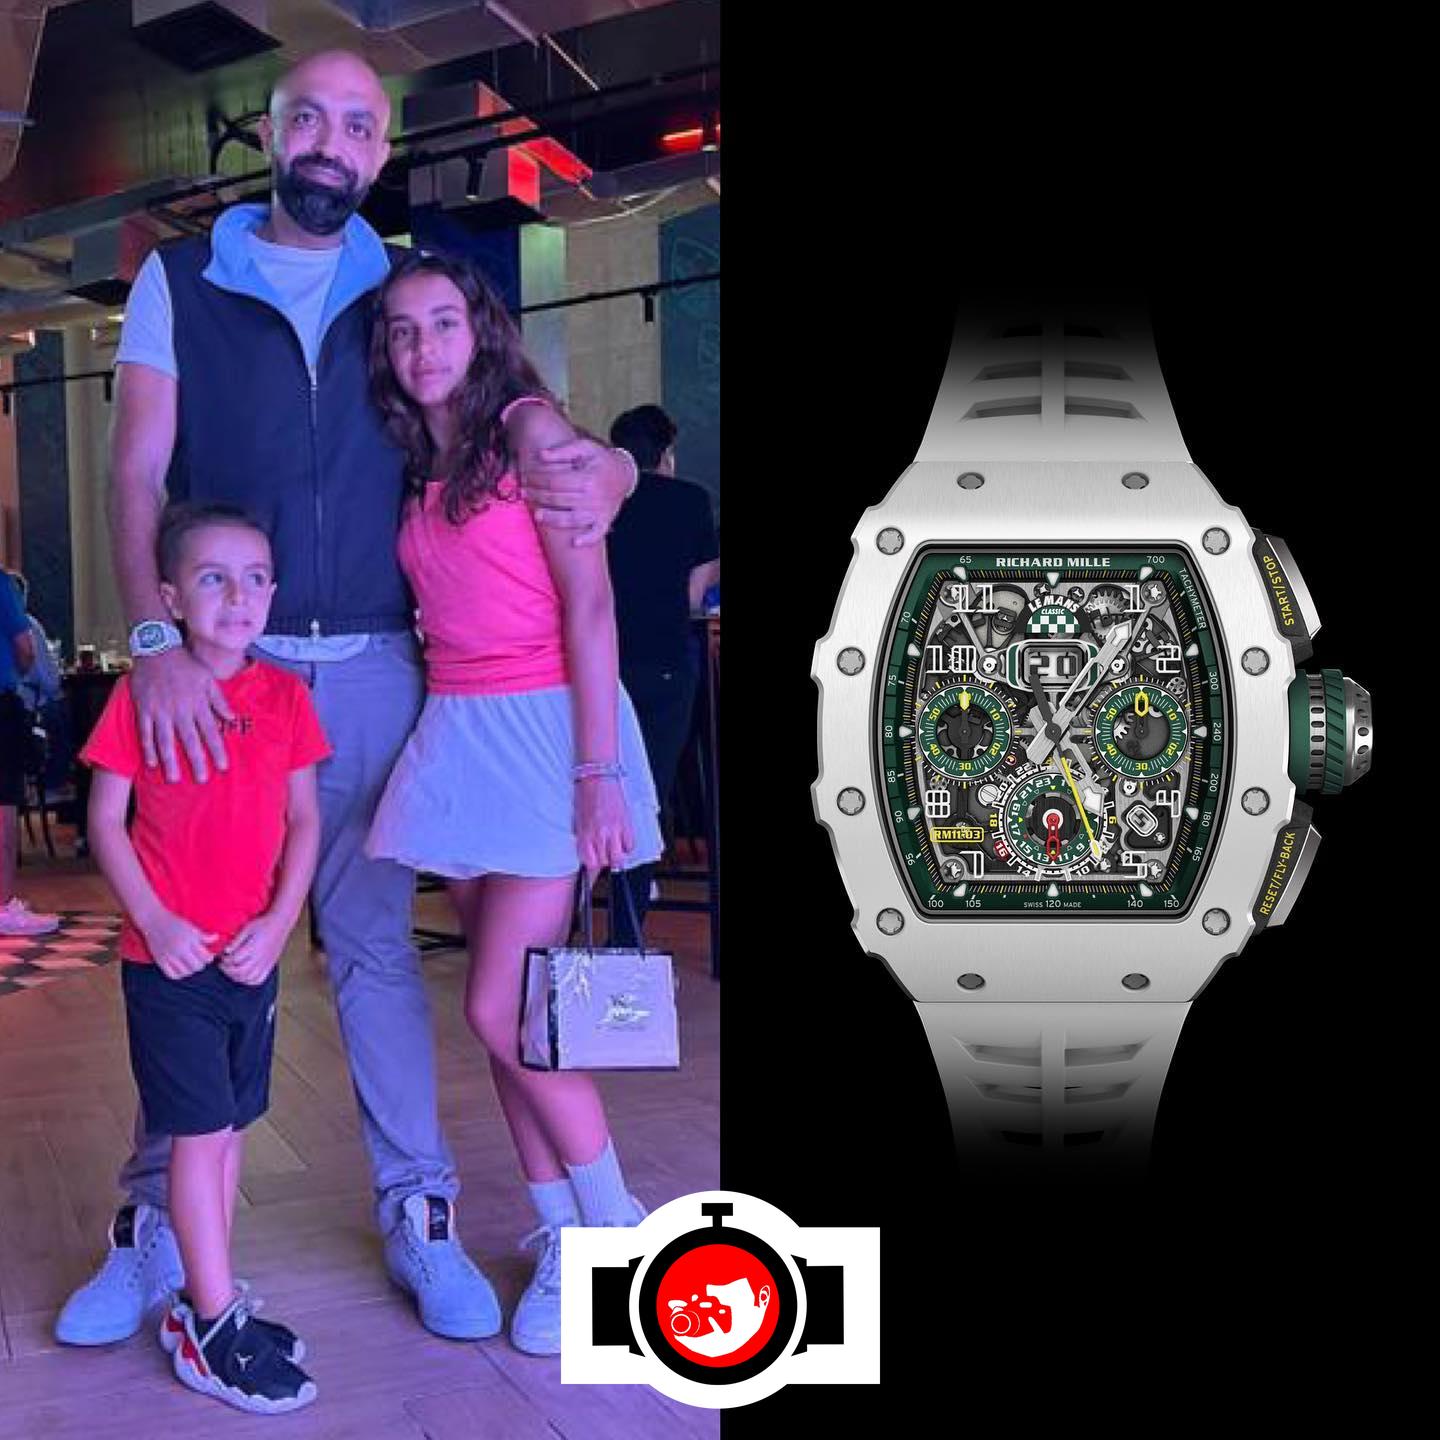 business man Mohammad Aleter spotted wearing a Richard Mille RM 11-03